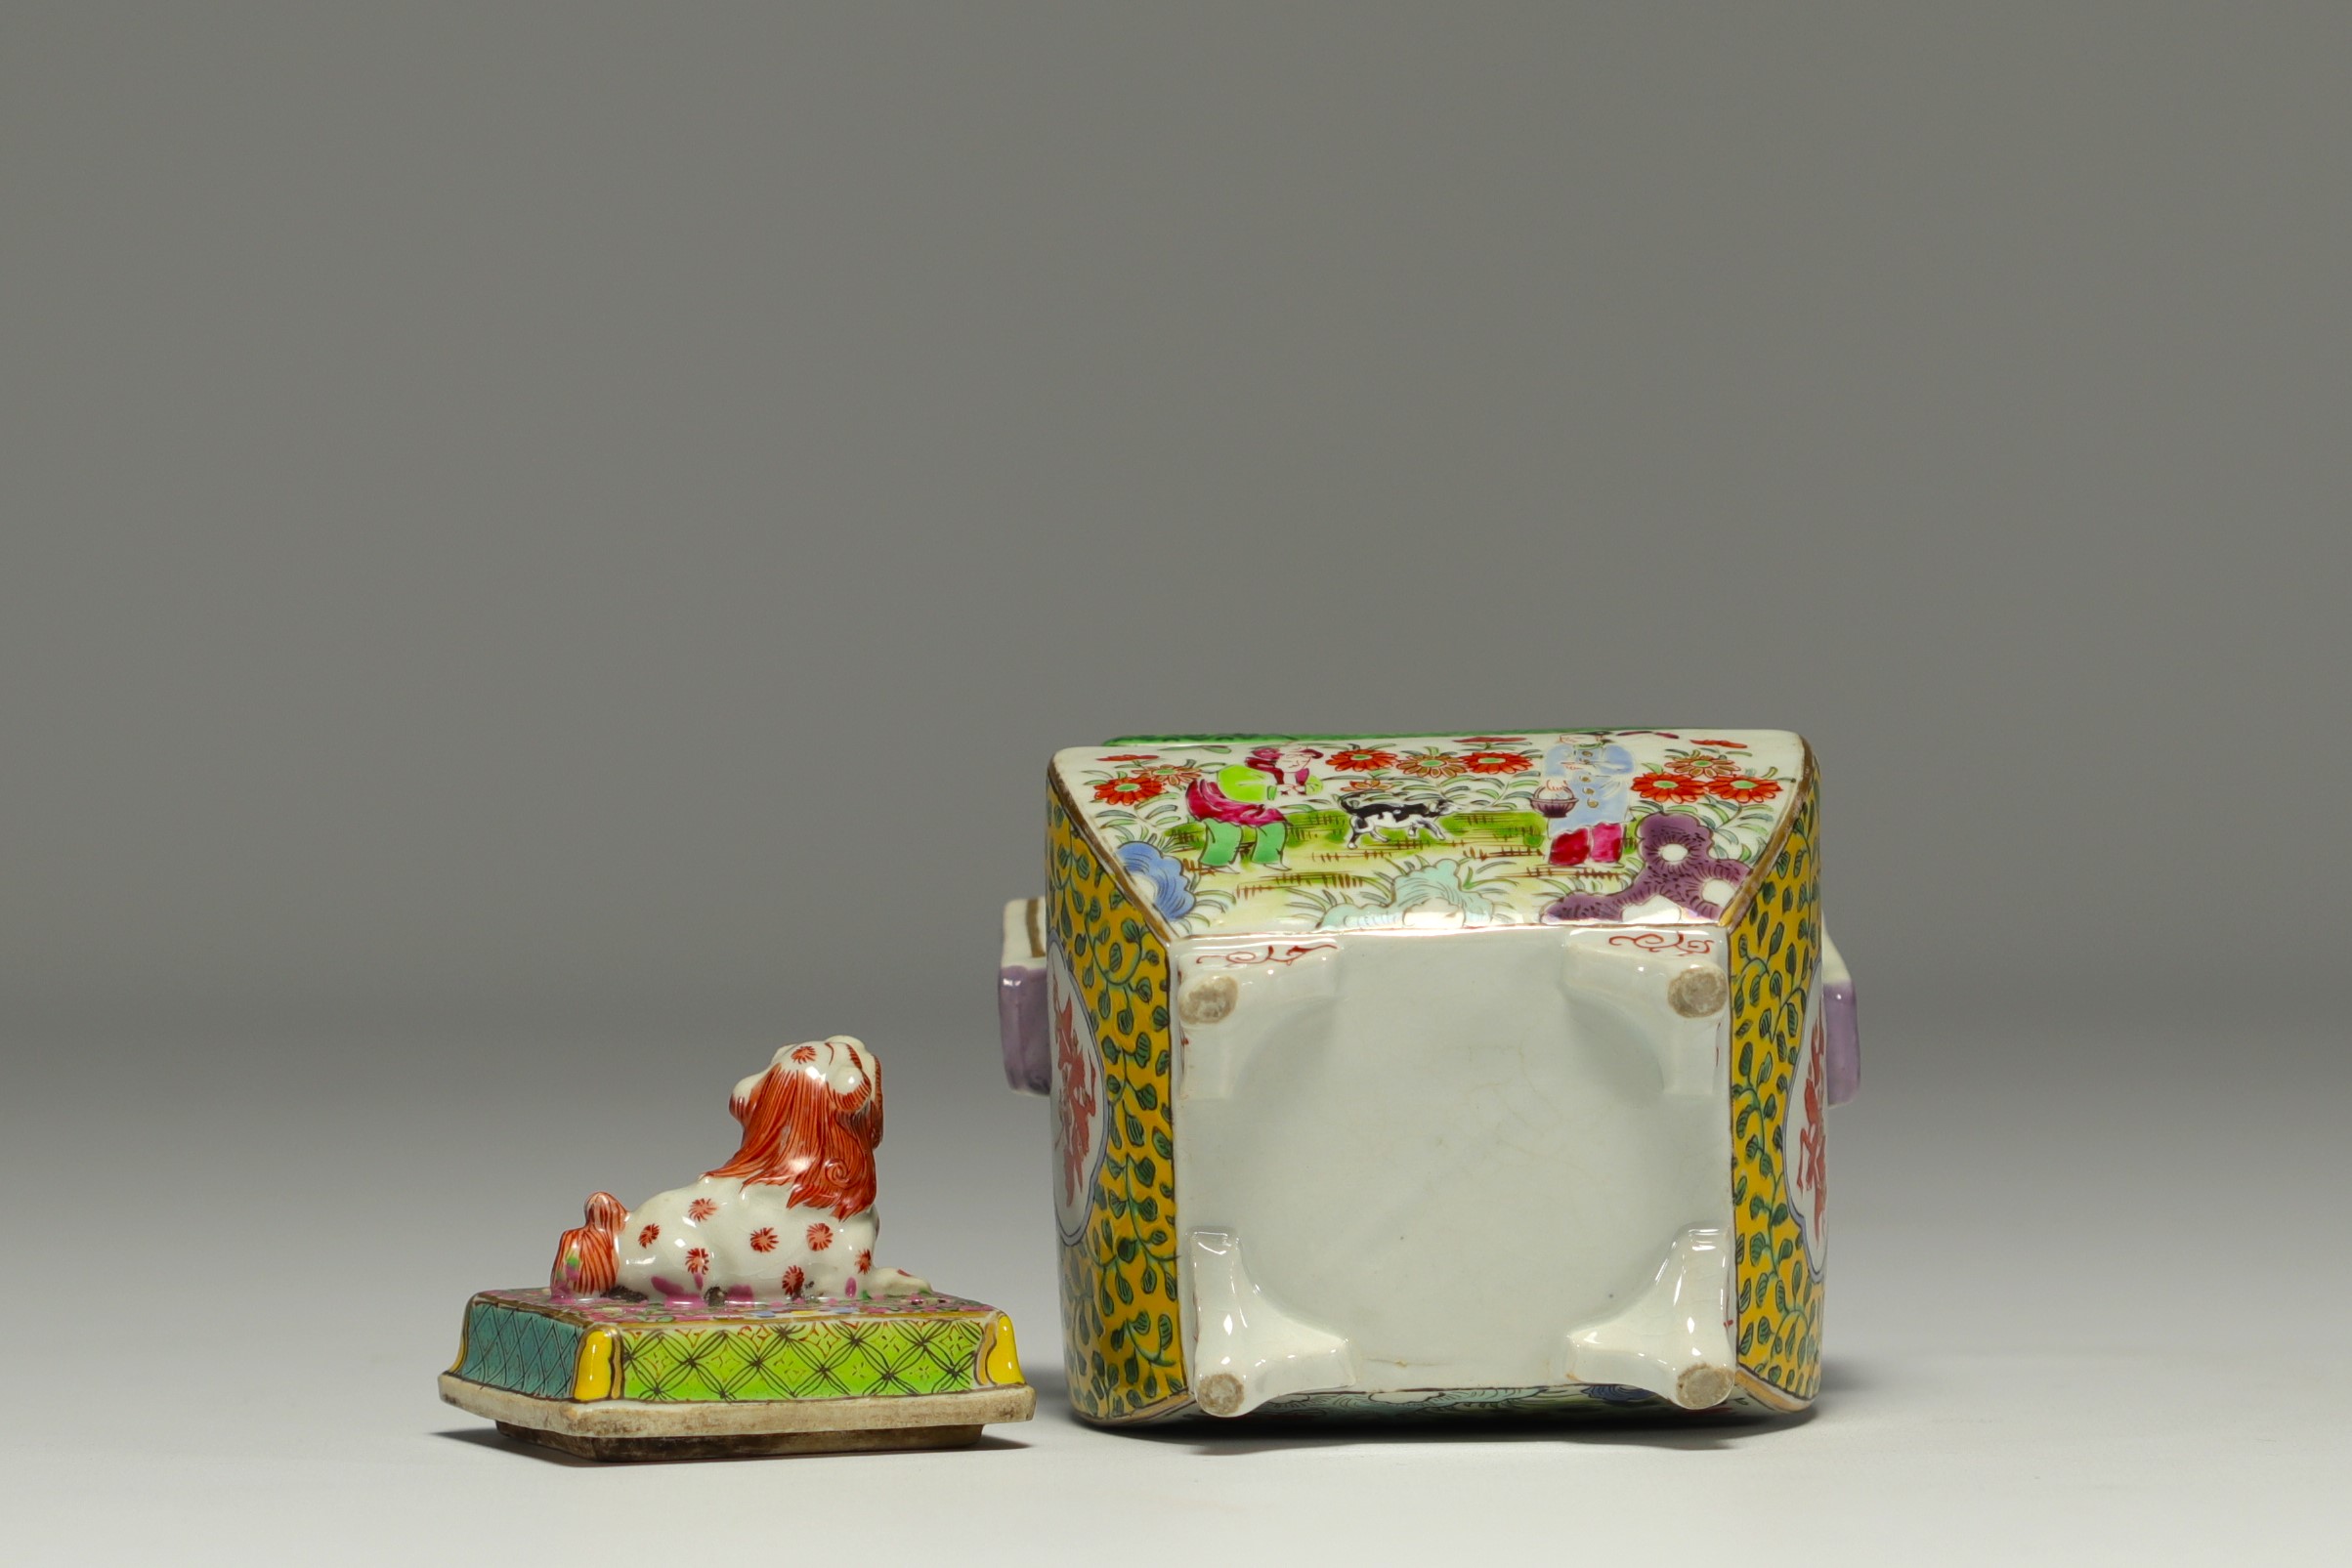 China - Small polychrome porcelain perfume burner with floral decoration, rooster and Fo dog. - Image 3 of 3